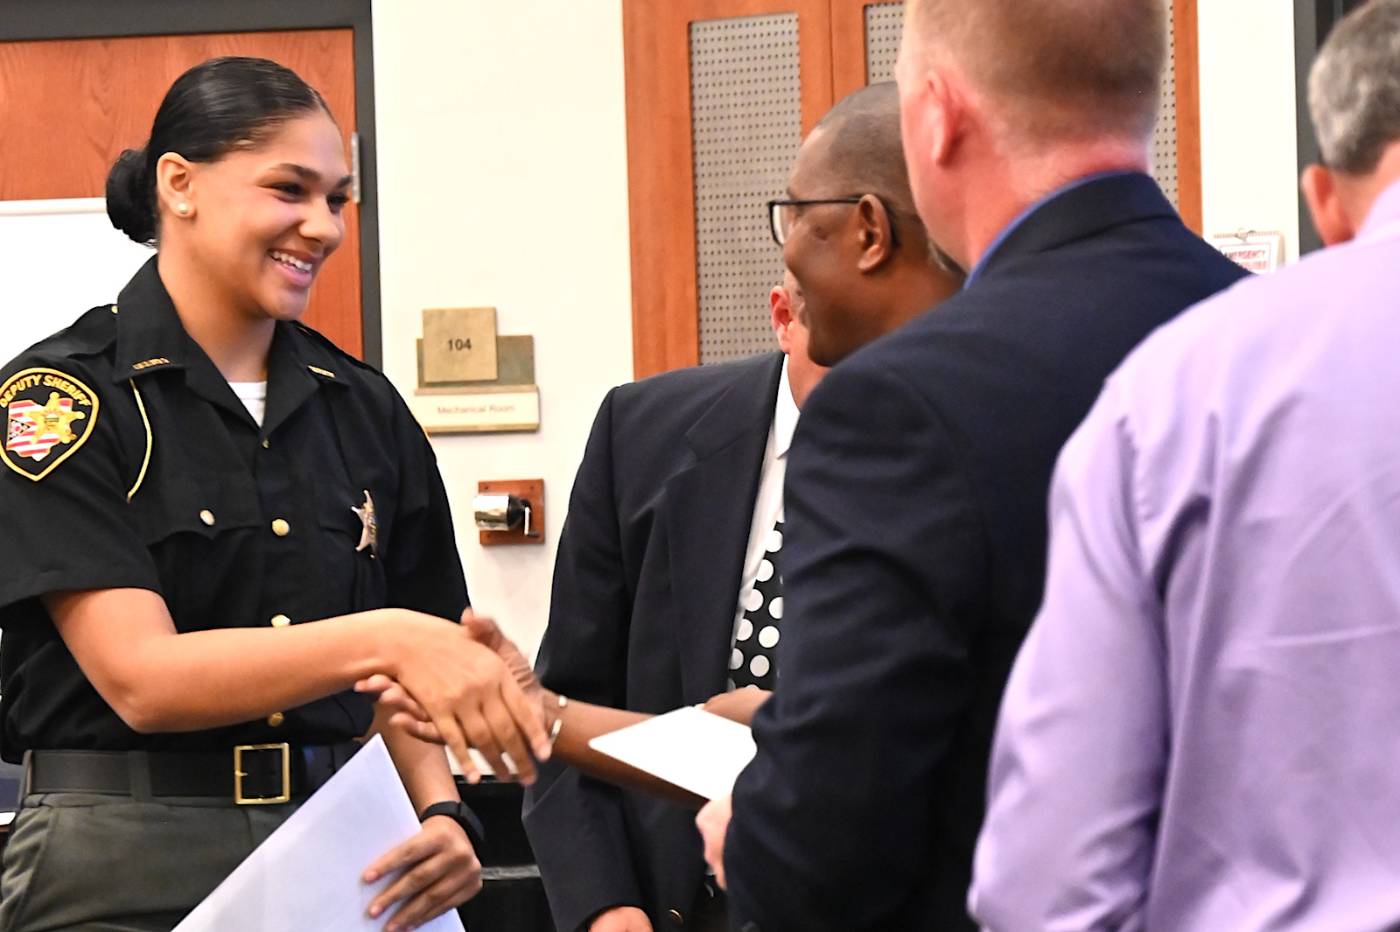 Female officer shaking hands at recognition ceremony